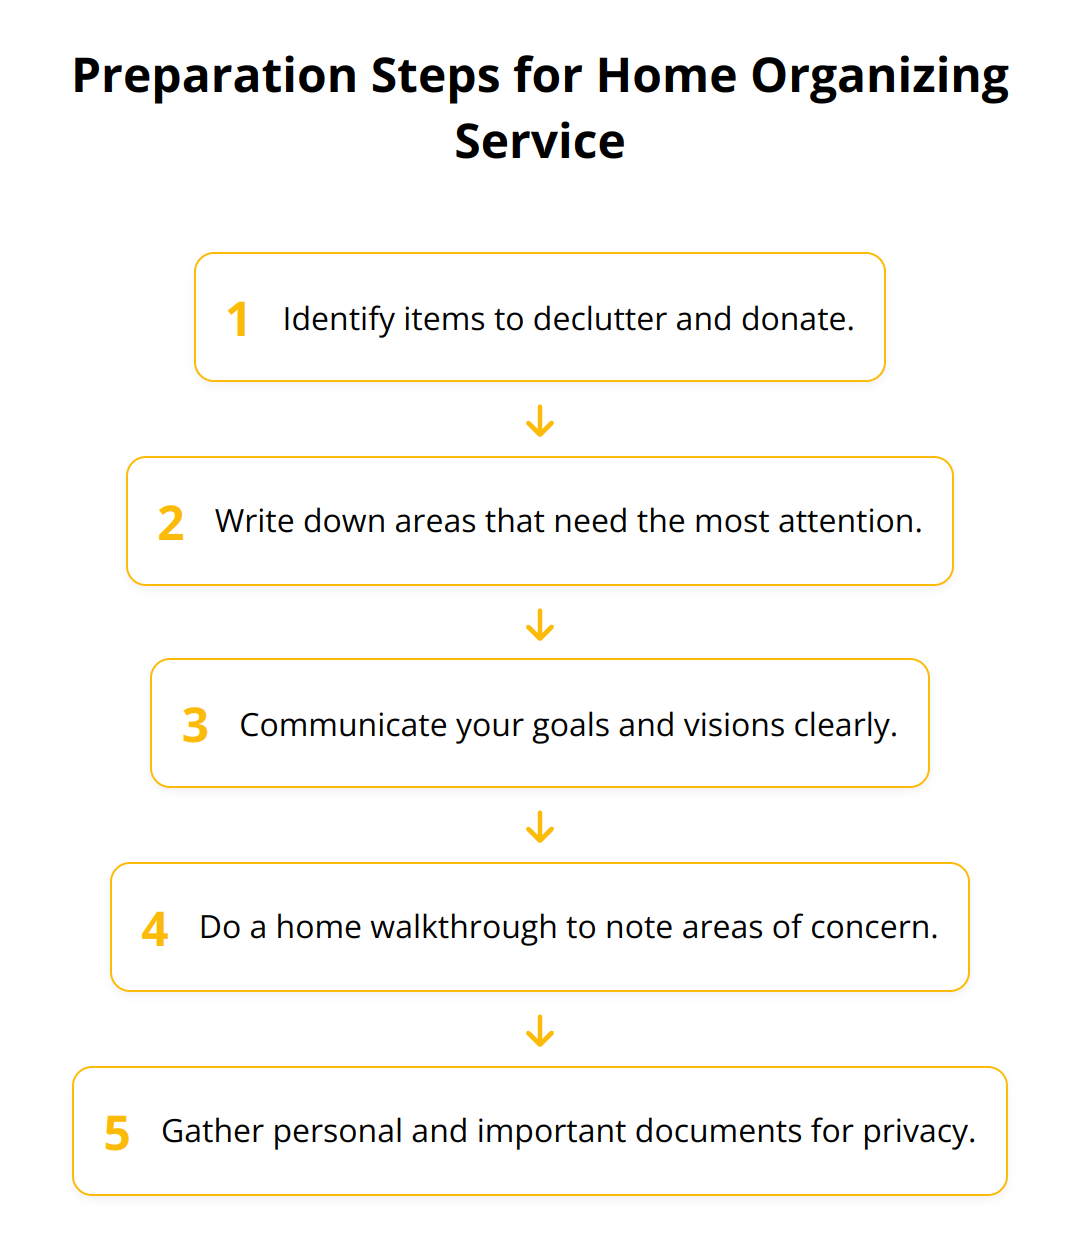 Flow Chart - Preparation Steps for Home Organizing Service